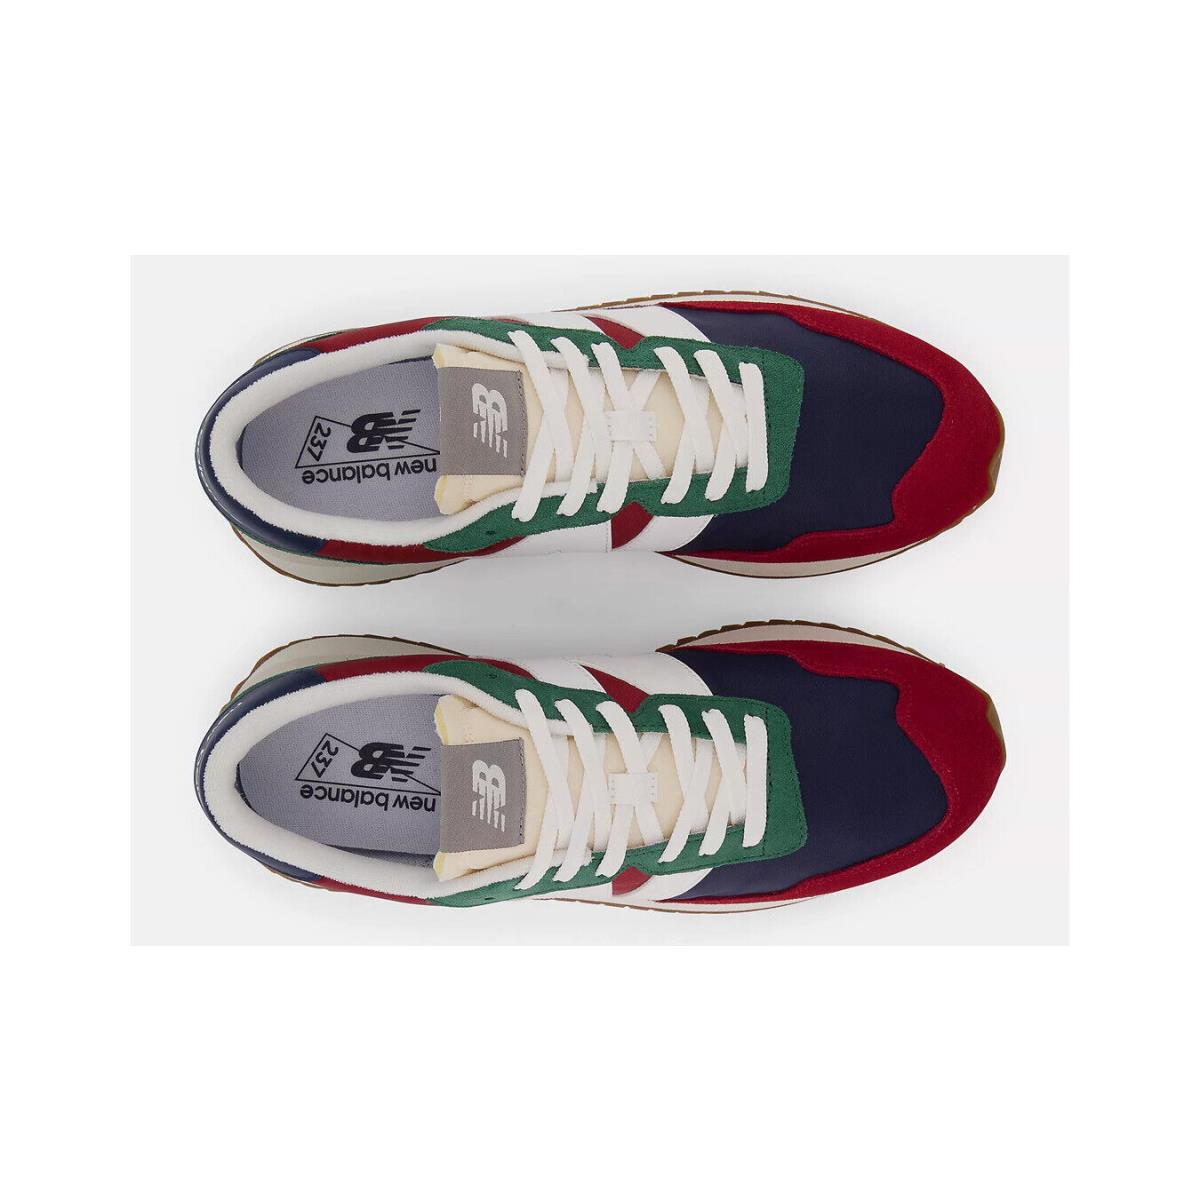 New Balance shoes  - Red/Green/Navy Blue 3